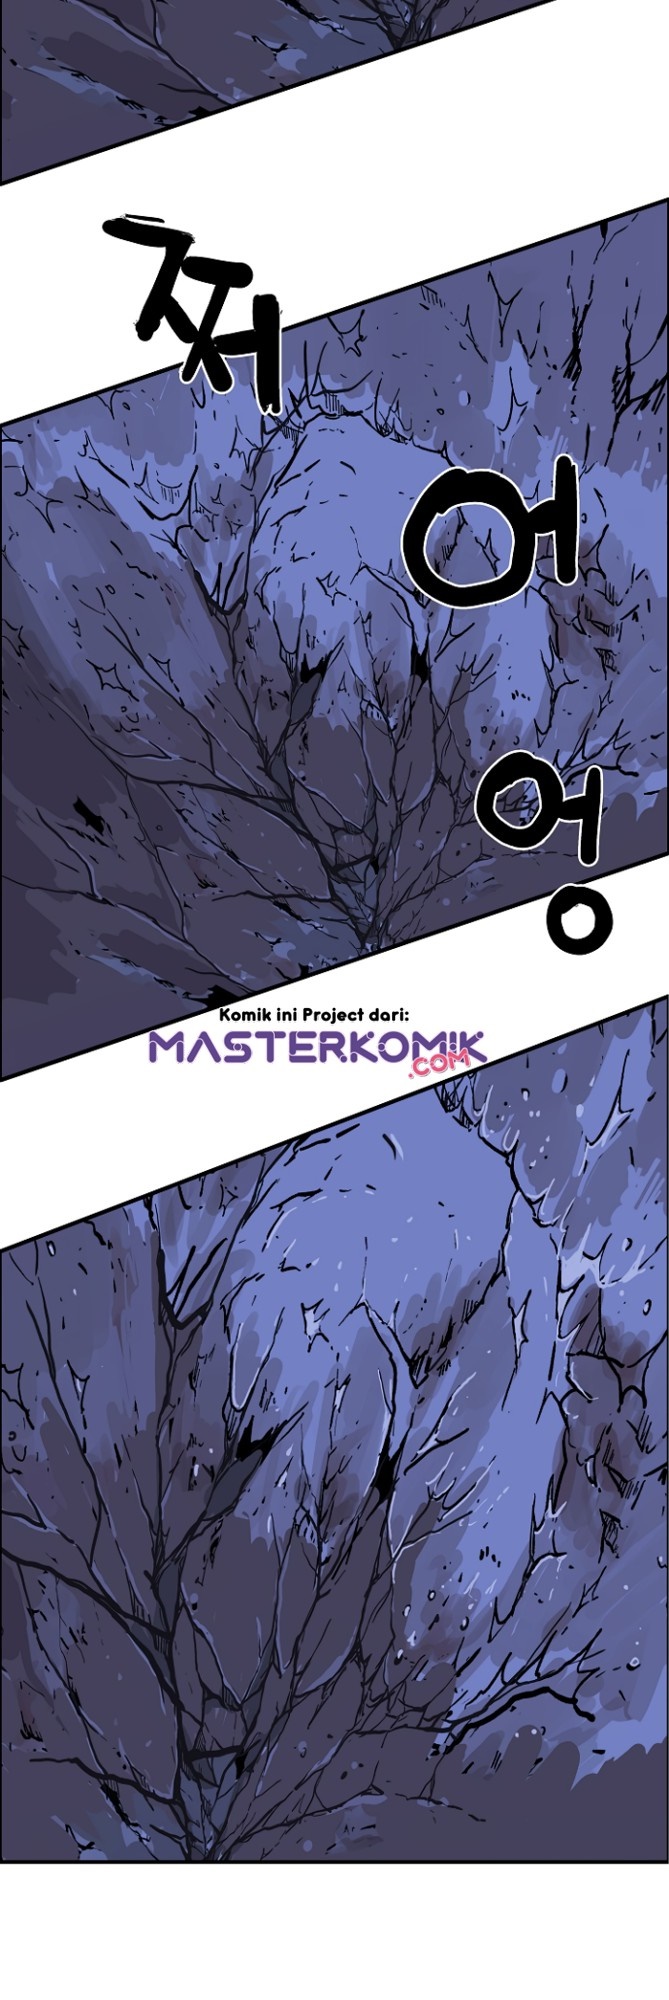 Fist Demon Of Mount Hua Chapter 23